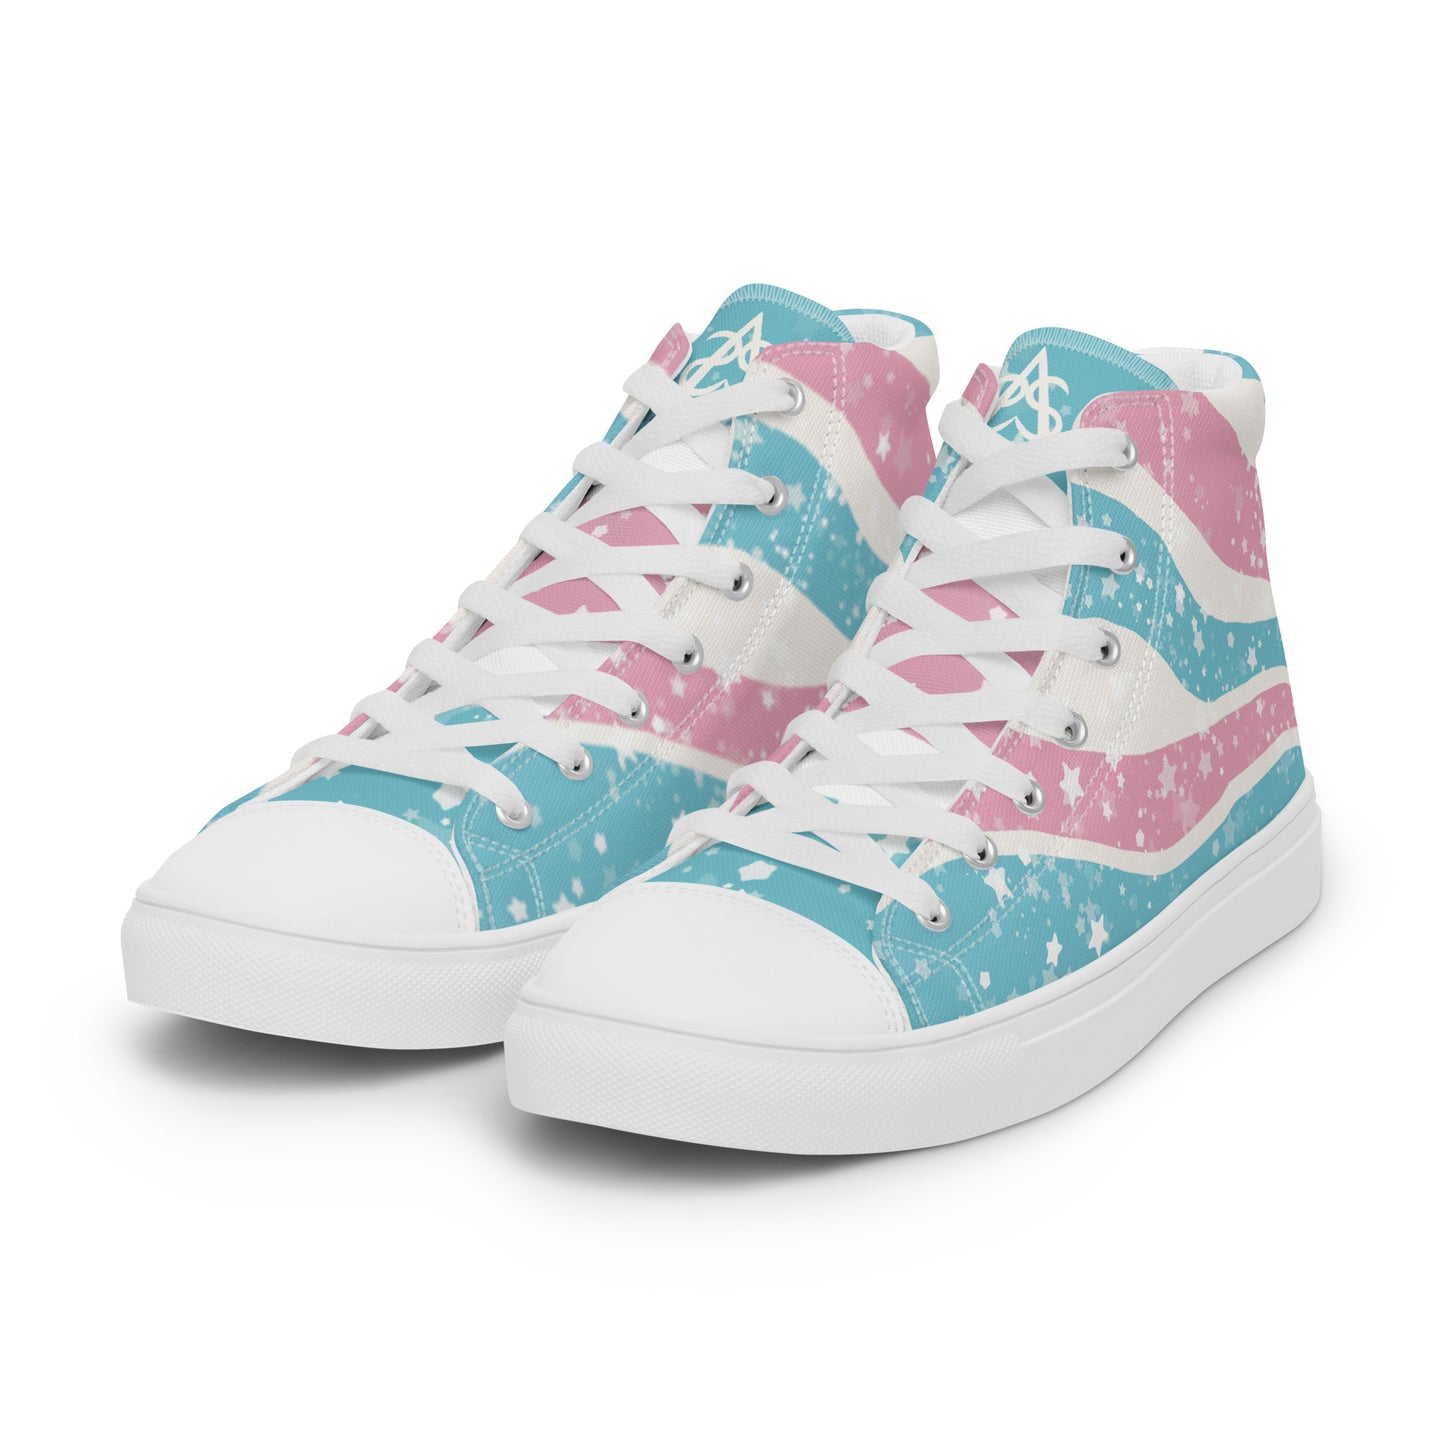 A pair of high top shoes have way lines starting from the heel and getting larger towards the laces in pink, white, and blue with white stars all over, white laces, and white details.